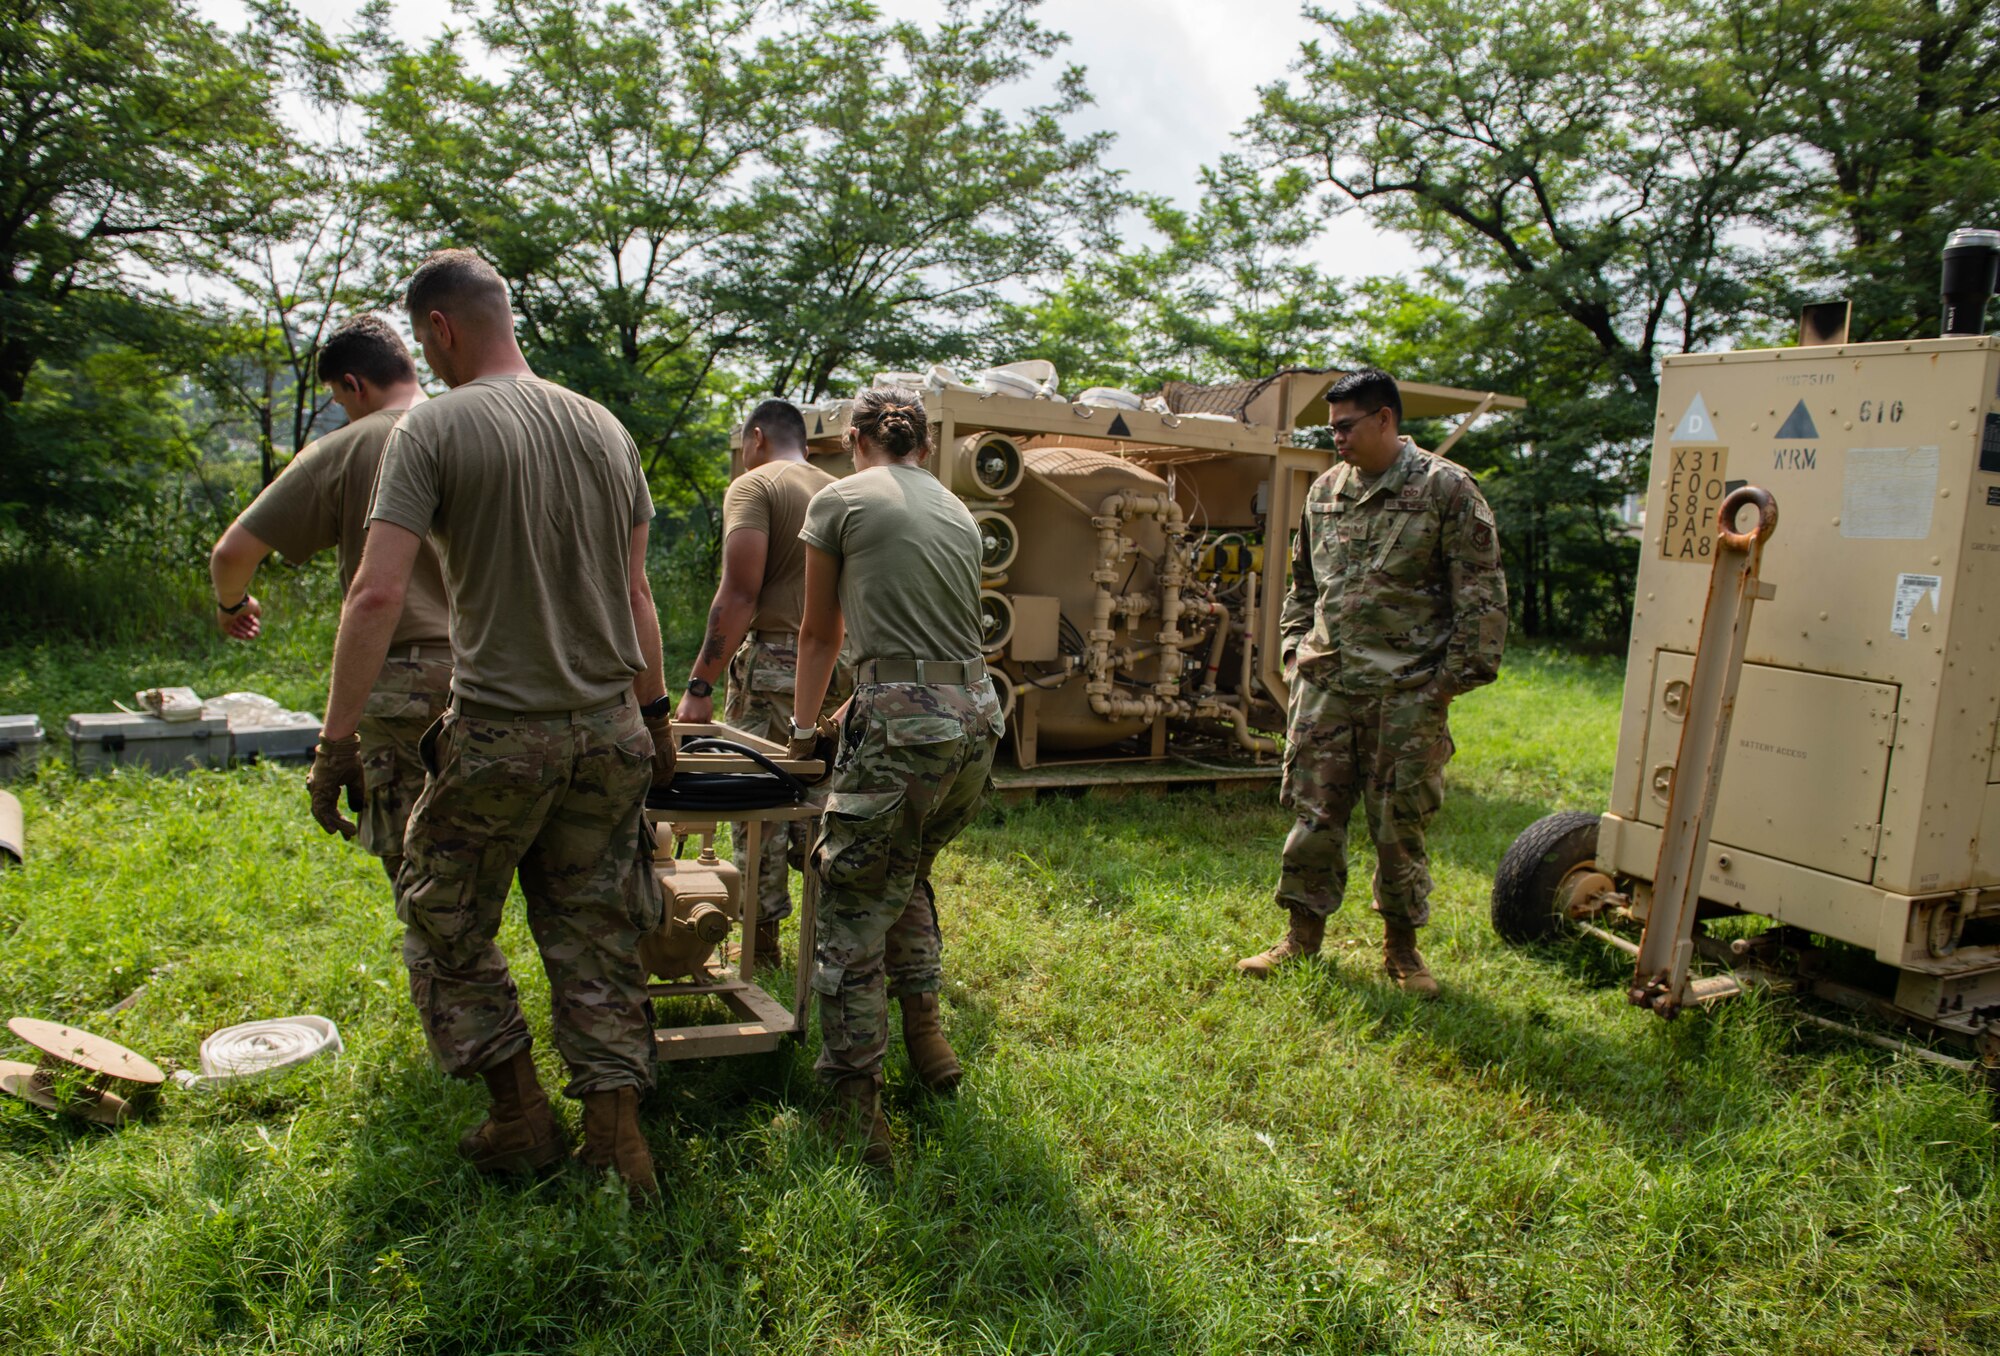 Airmen carry a machine used to purify water.